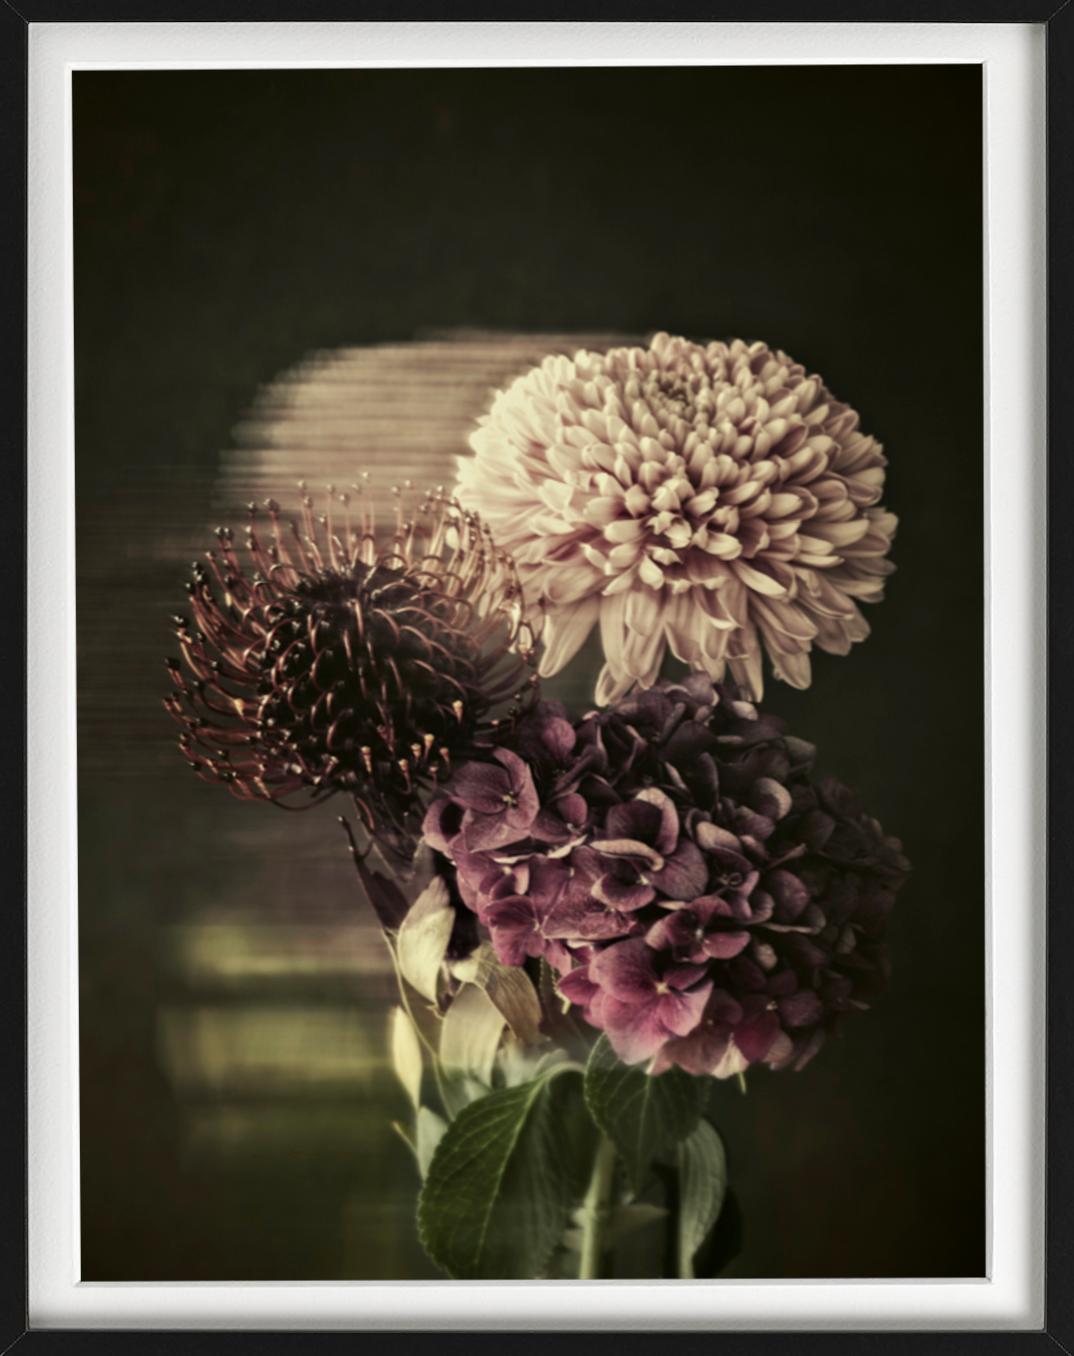 Flowers - still life of flower bouquet in earth and dark colours - Photograph by Tina Trumpp